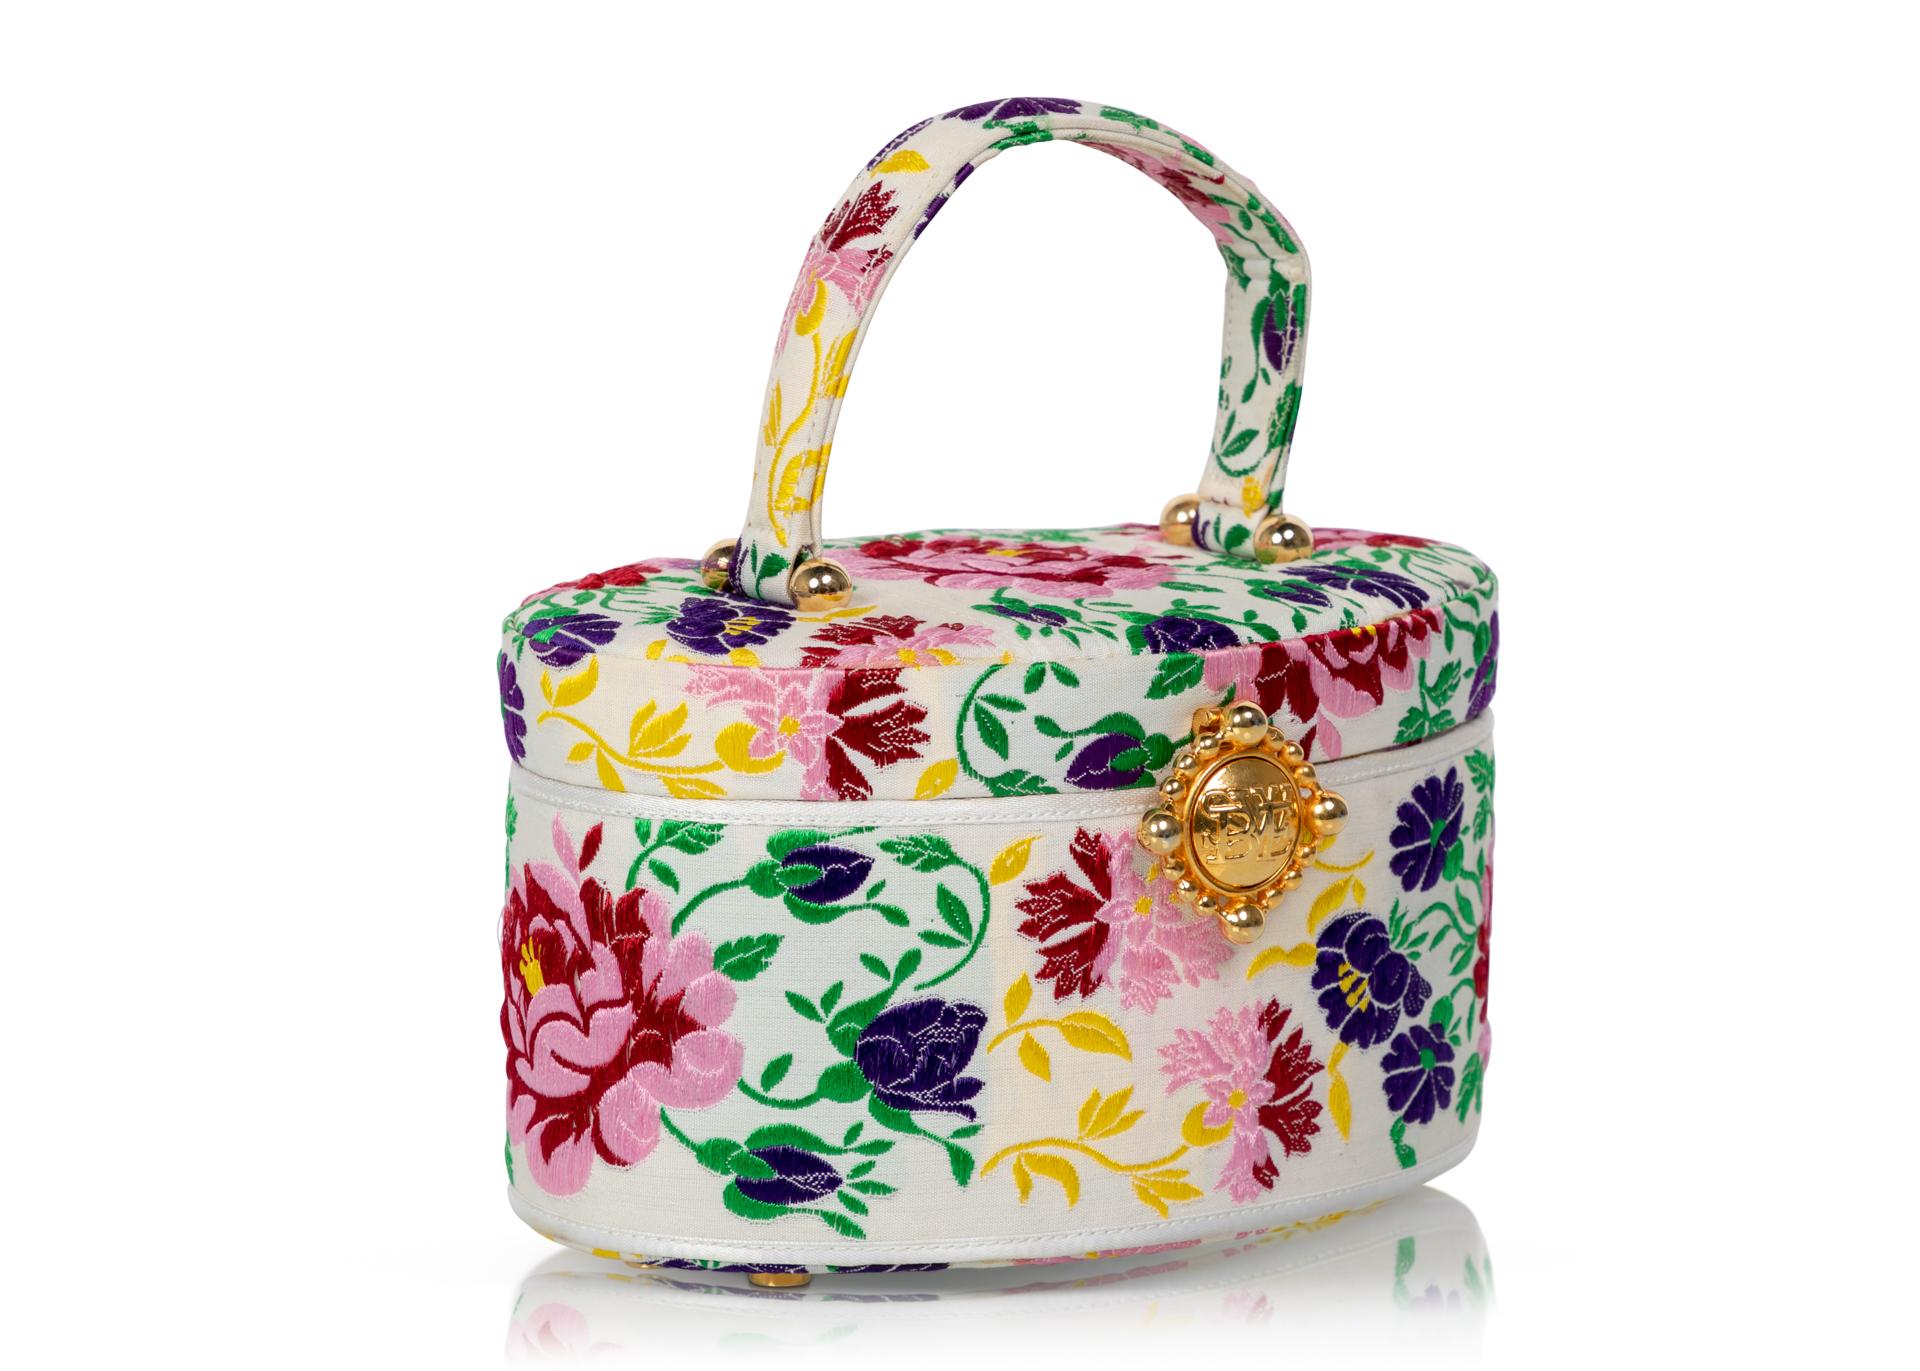 Susan Bennis Warren Edwards vintage top handle bag done in Ivory and multicolor woven silk floral brocade done in purple, pink, red and yellow with green leaves. The bottom of the bag has six gold feet each set with a pearl. The bag is lined in